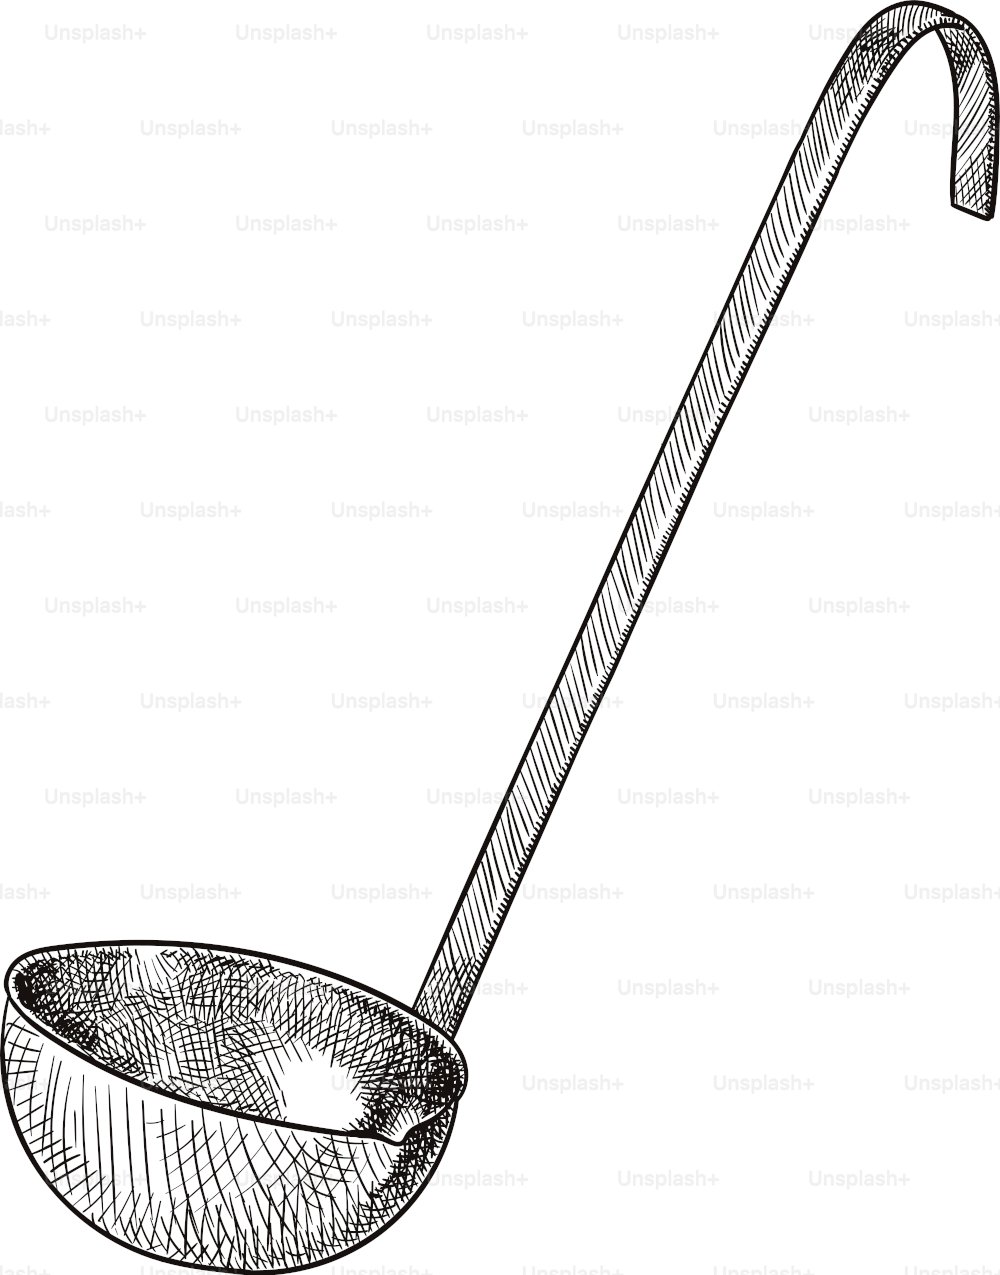 Old style illustration of a ladle